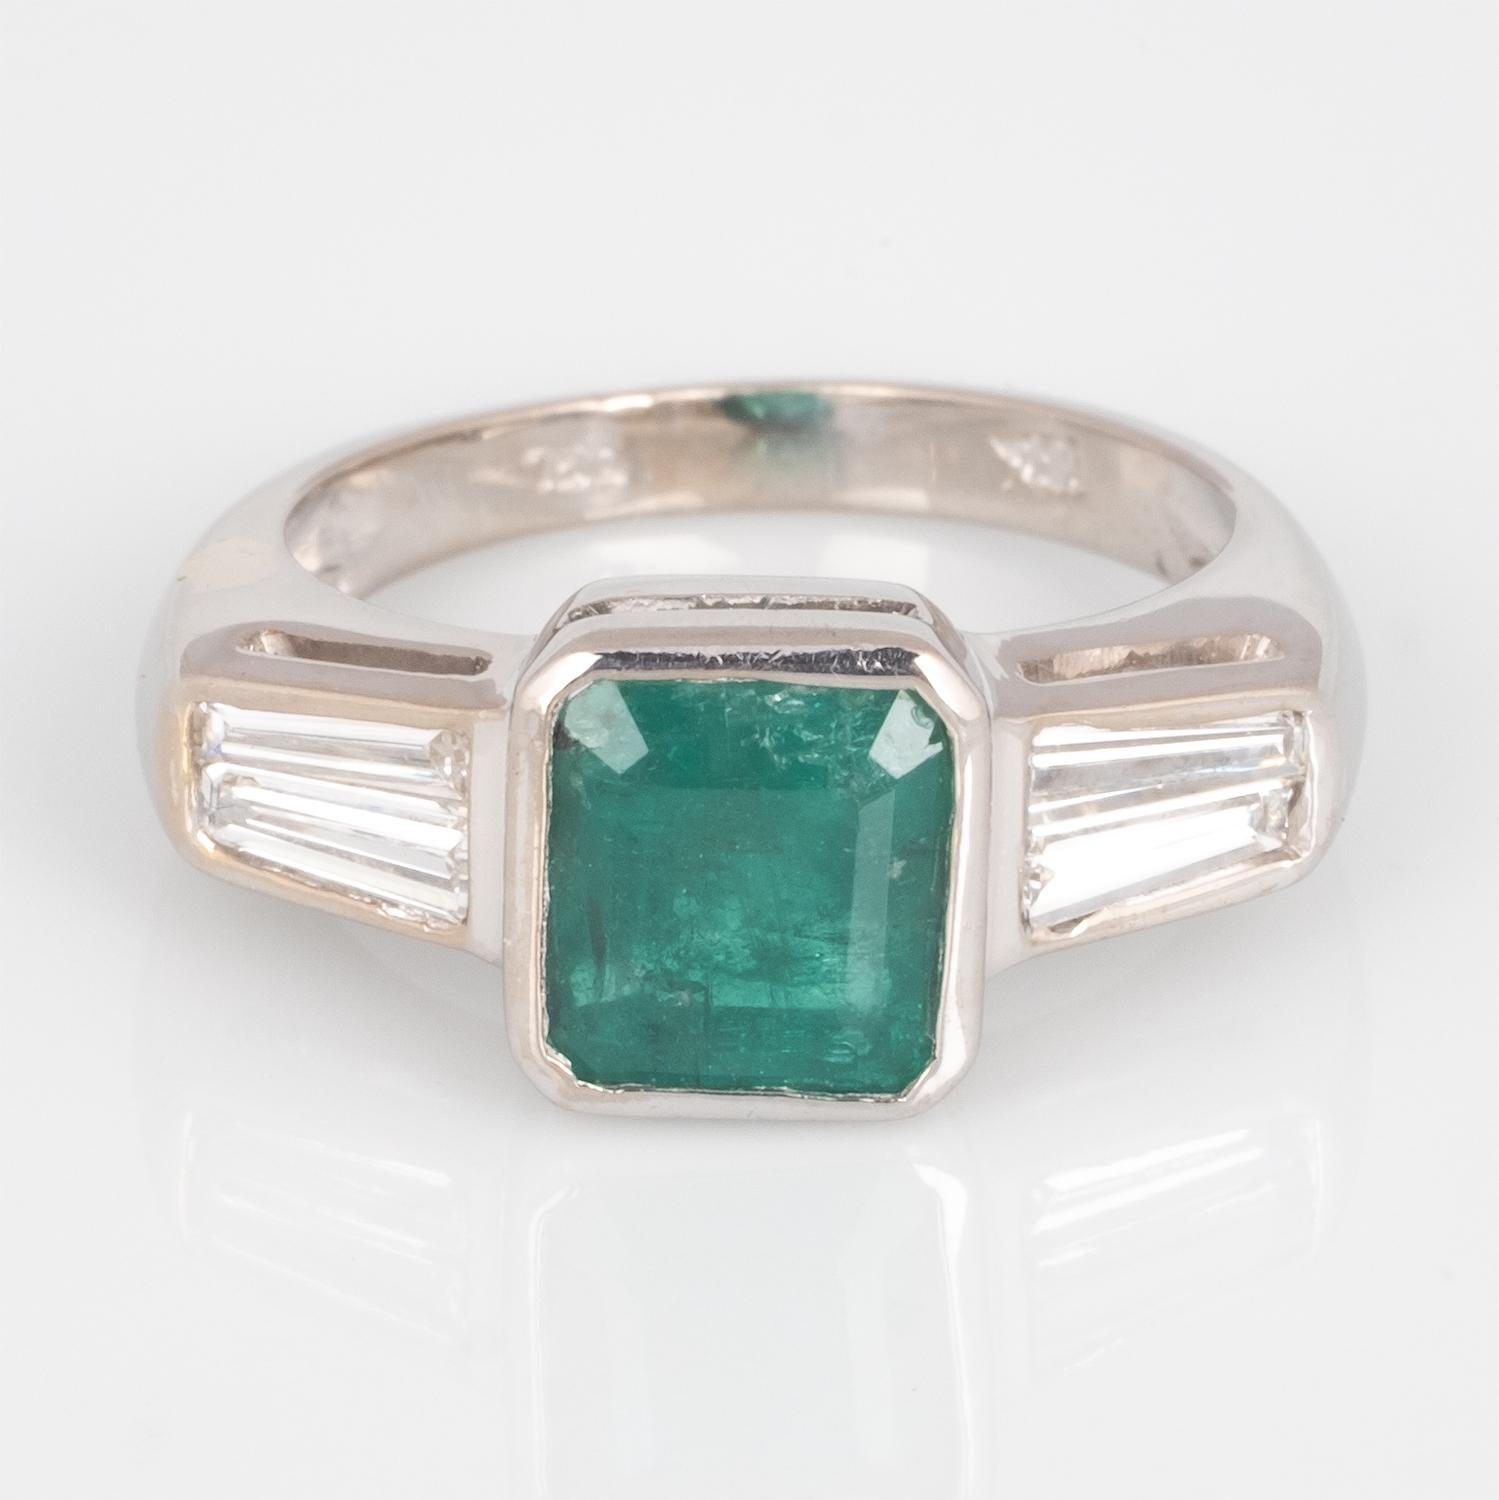 Vivid green emerald accented with 4 tapered diamond baguettes creates a sophisticated Art Deco look.
Emerald is slightly bluish green which is the most desirable color for an emerald. 
The diamond baguettes are VS clarity and G/H color. The double